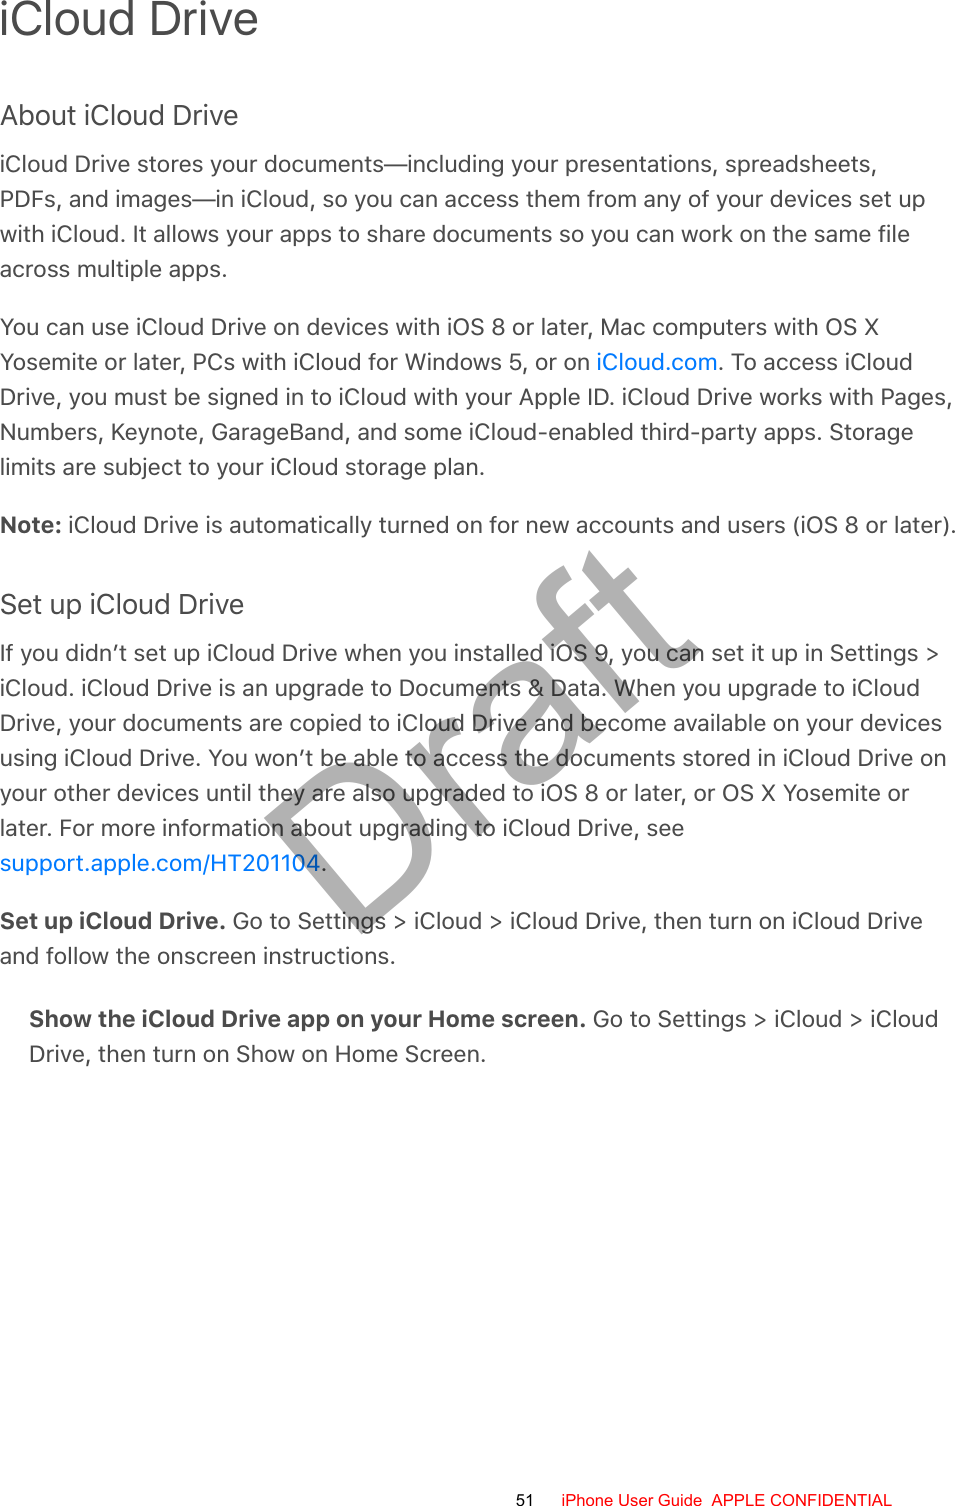 iCloud DriveAbout iCloud DriveiCloud Drive stores your documents—including your presentations, spreadsheets,PDFs, and images—in iCloud, so you can access them from any of your devices set upwith iCloud. It allows your apps to share documents so you can work on the same fileacross multiple apps.You can use iCloud Drive on devices with iOS 8 or later, Mac computers with OS XYosemite or later, PCs with iCloud for Windows 5, or on  . To access iCloudDrive, you must be signed in to iCloud with your Apple ID. iCloud Drive works with Pages,Numbers, Keynote, GarageBand, and some iCloud-enabled third-party apps. Storagelimits are subject to your iCloud storage plan.Note: iCloud Drive is automatically turned on for new accounts and users (iOS 8 or later).Set up iCloud DriveIf you didn’t set up iCloud Drive when you installed iOS 9, you can set it up in Settings &gt;iCloud. iCloud Drive is an upgrade to Documents &amp; Data. When you upgrade to iCloudDrive, your documents are copied to iCloud Drive and become available on your devicesusing iCloud Drive. You won’t be able to access the documents stored in iCloud Drive onyour other devices until they are also upgraded to iOS 8 or later, or OS X Yosemite orlater. For more information about upgrading to iCloud Drive, see.Set up iCloud Drive. Go to Settings &gt; iCloud &gt; iCloud Drive, then turn on iCloud Driveand follow the onscreen instructions.Show the iCloud Drive app on your Home screen. Go to Settings &gt; iCloud &gt; iCloudDrive, then turn on Show on Home Screen.iCloud.comsupport.apple.com/HT20110451 iPhone User Guide  APPLE CONFIDENTIALDraft